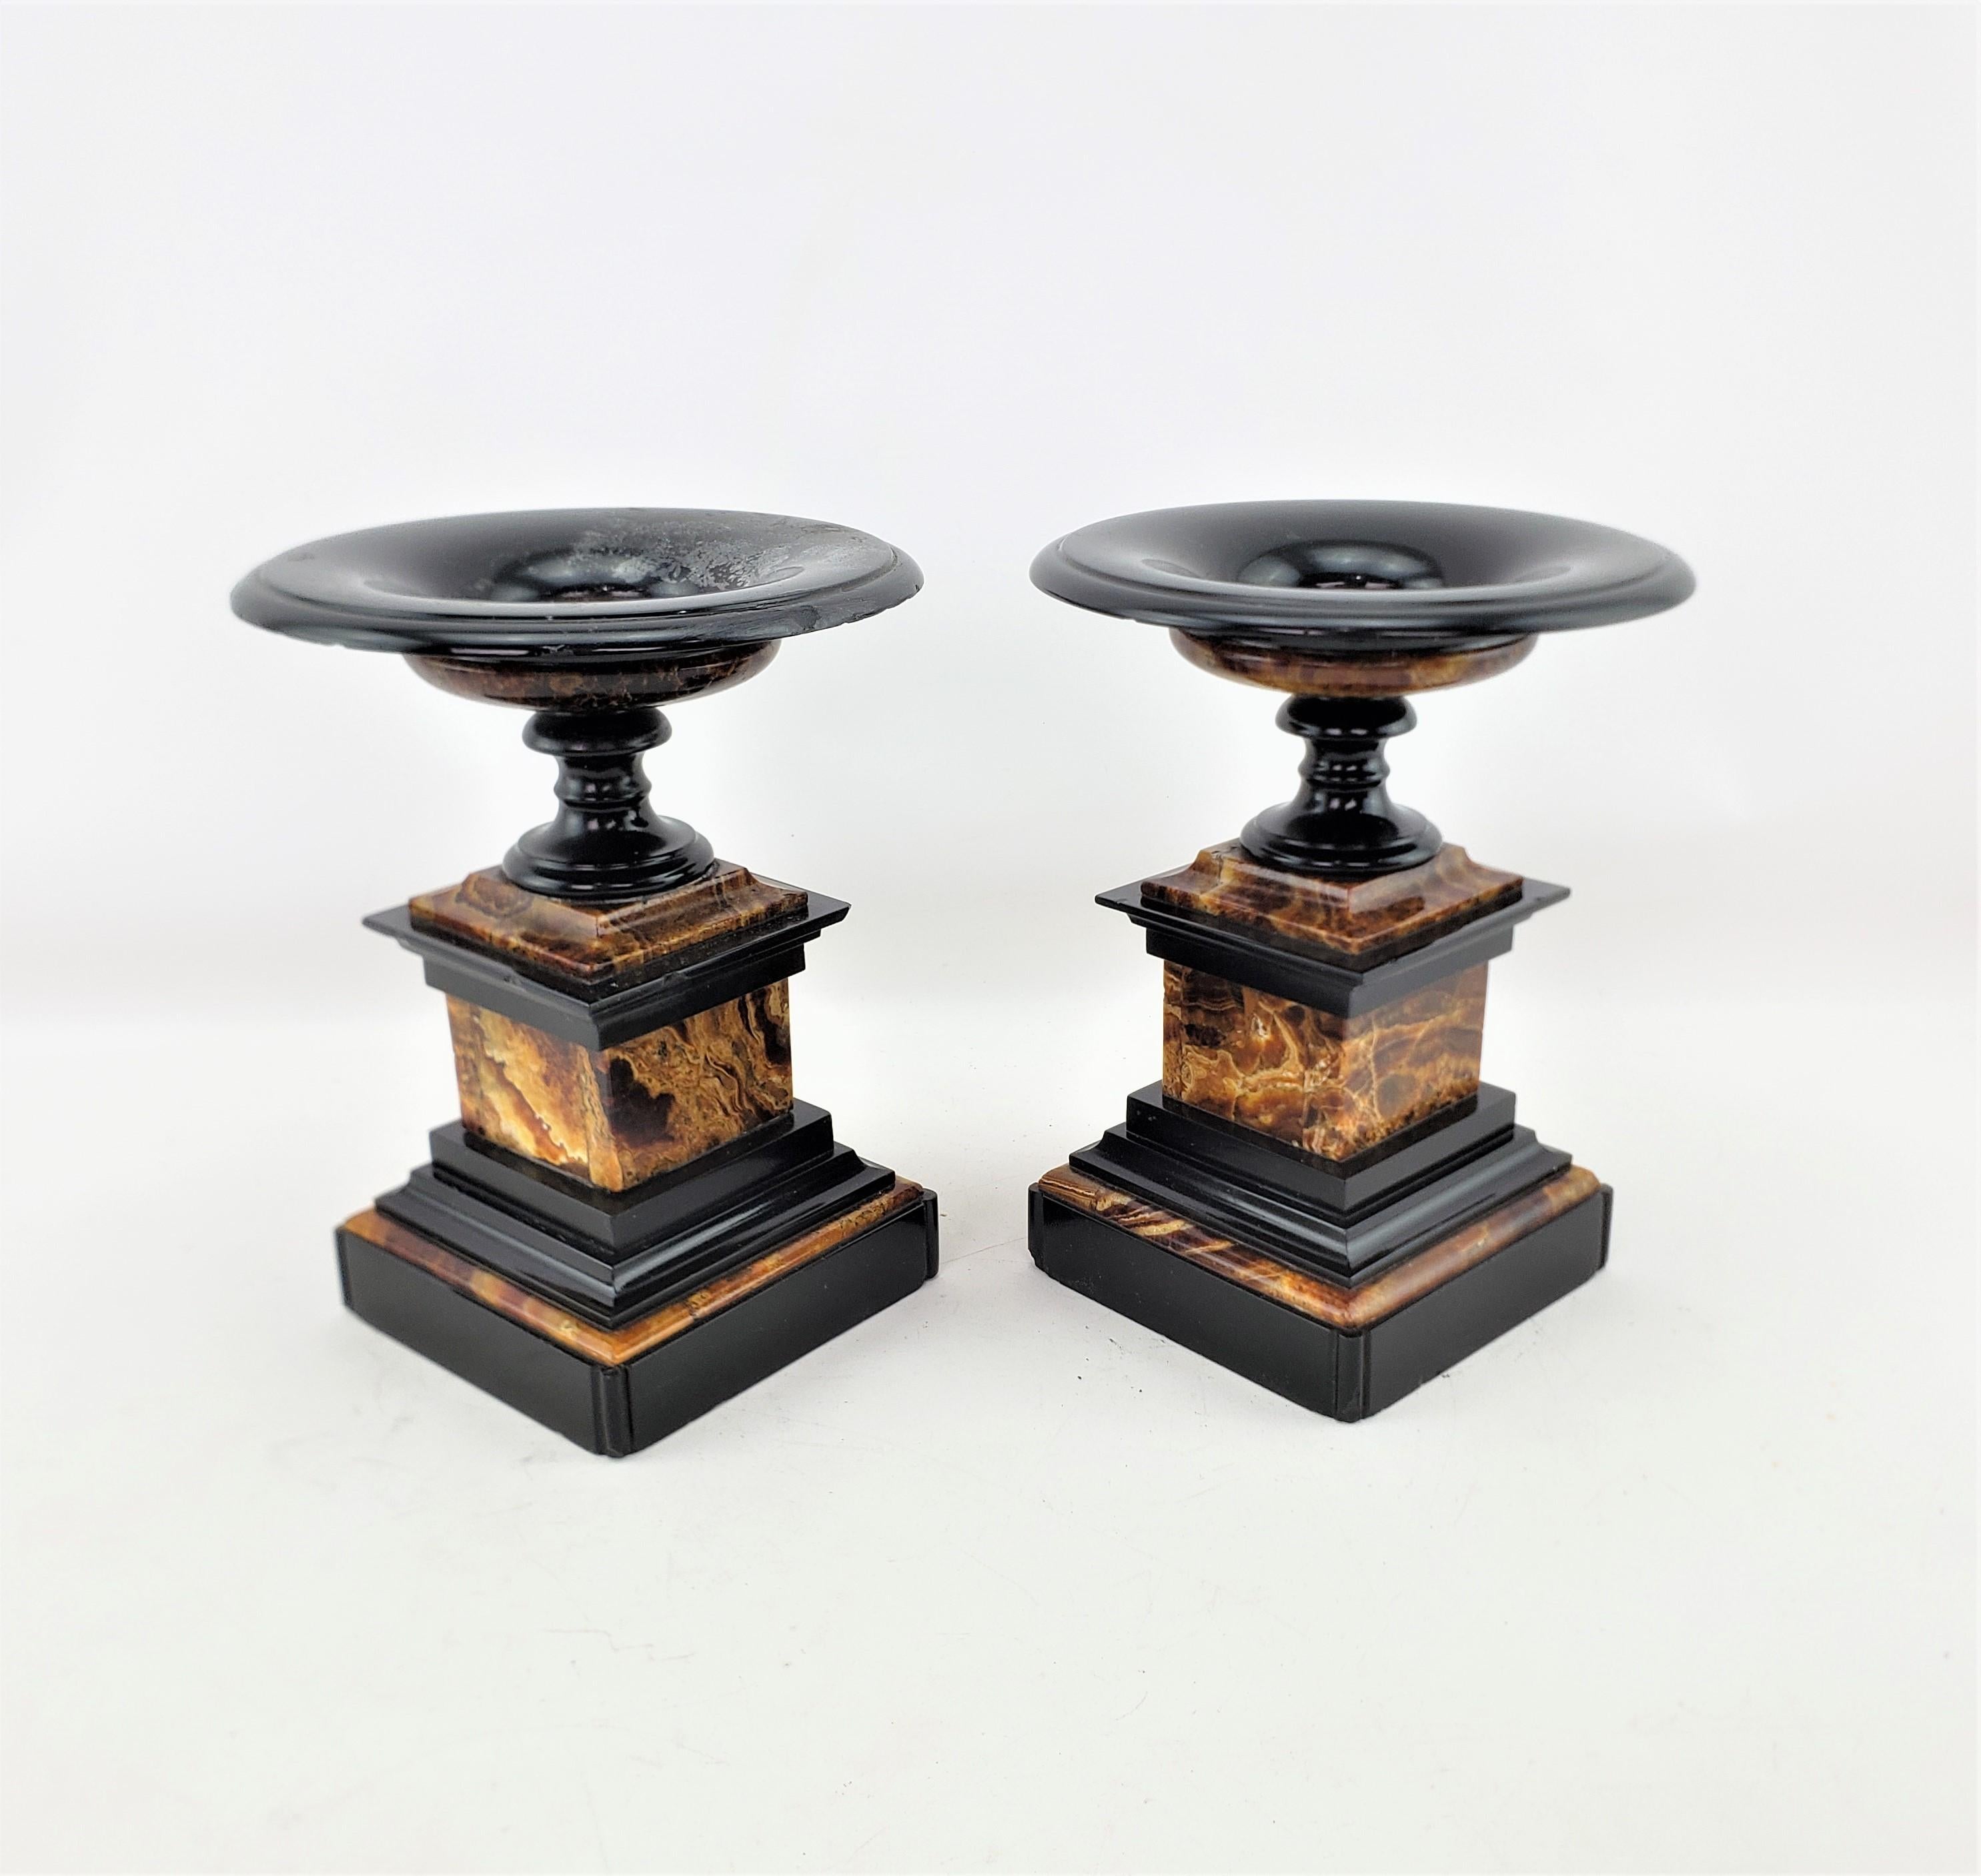 Pair of Antique French Polished Slate & Marble Garniture Set or Tazzas For Sale 2